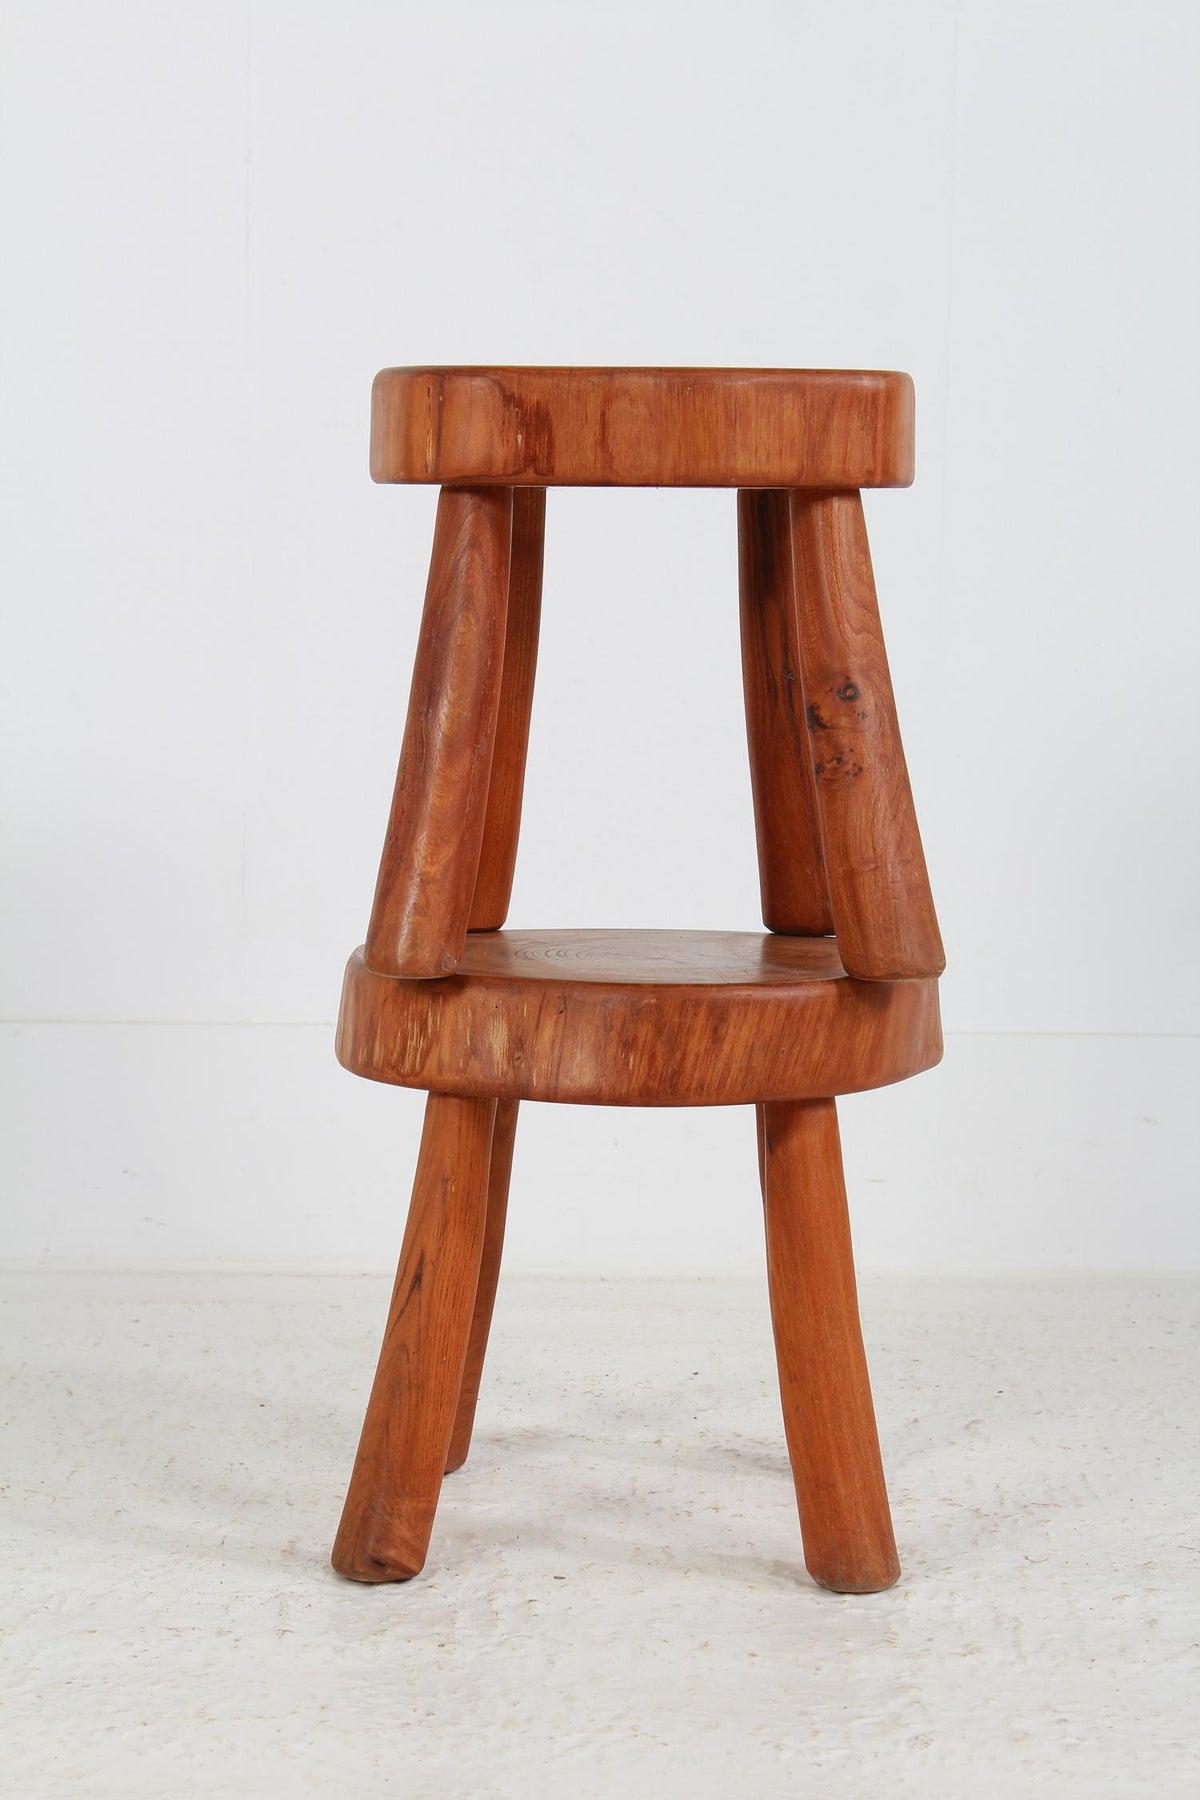 Two Mid-Century Modern Wood Stools in the Style of Charlotte Perriand